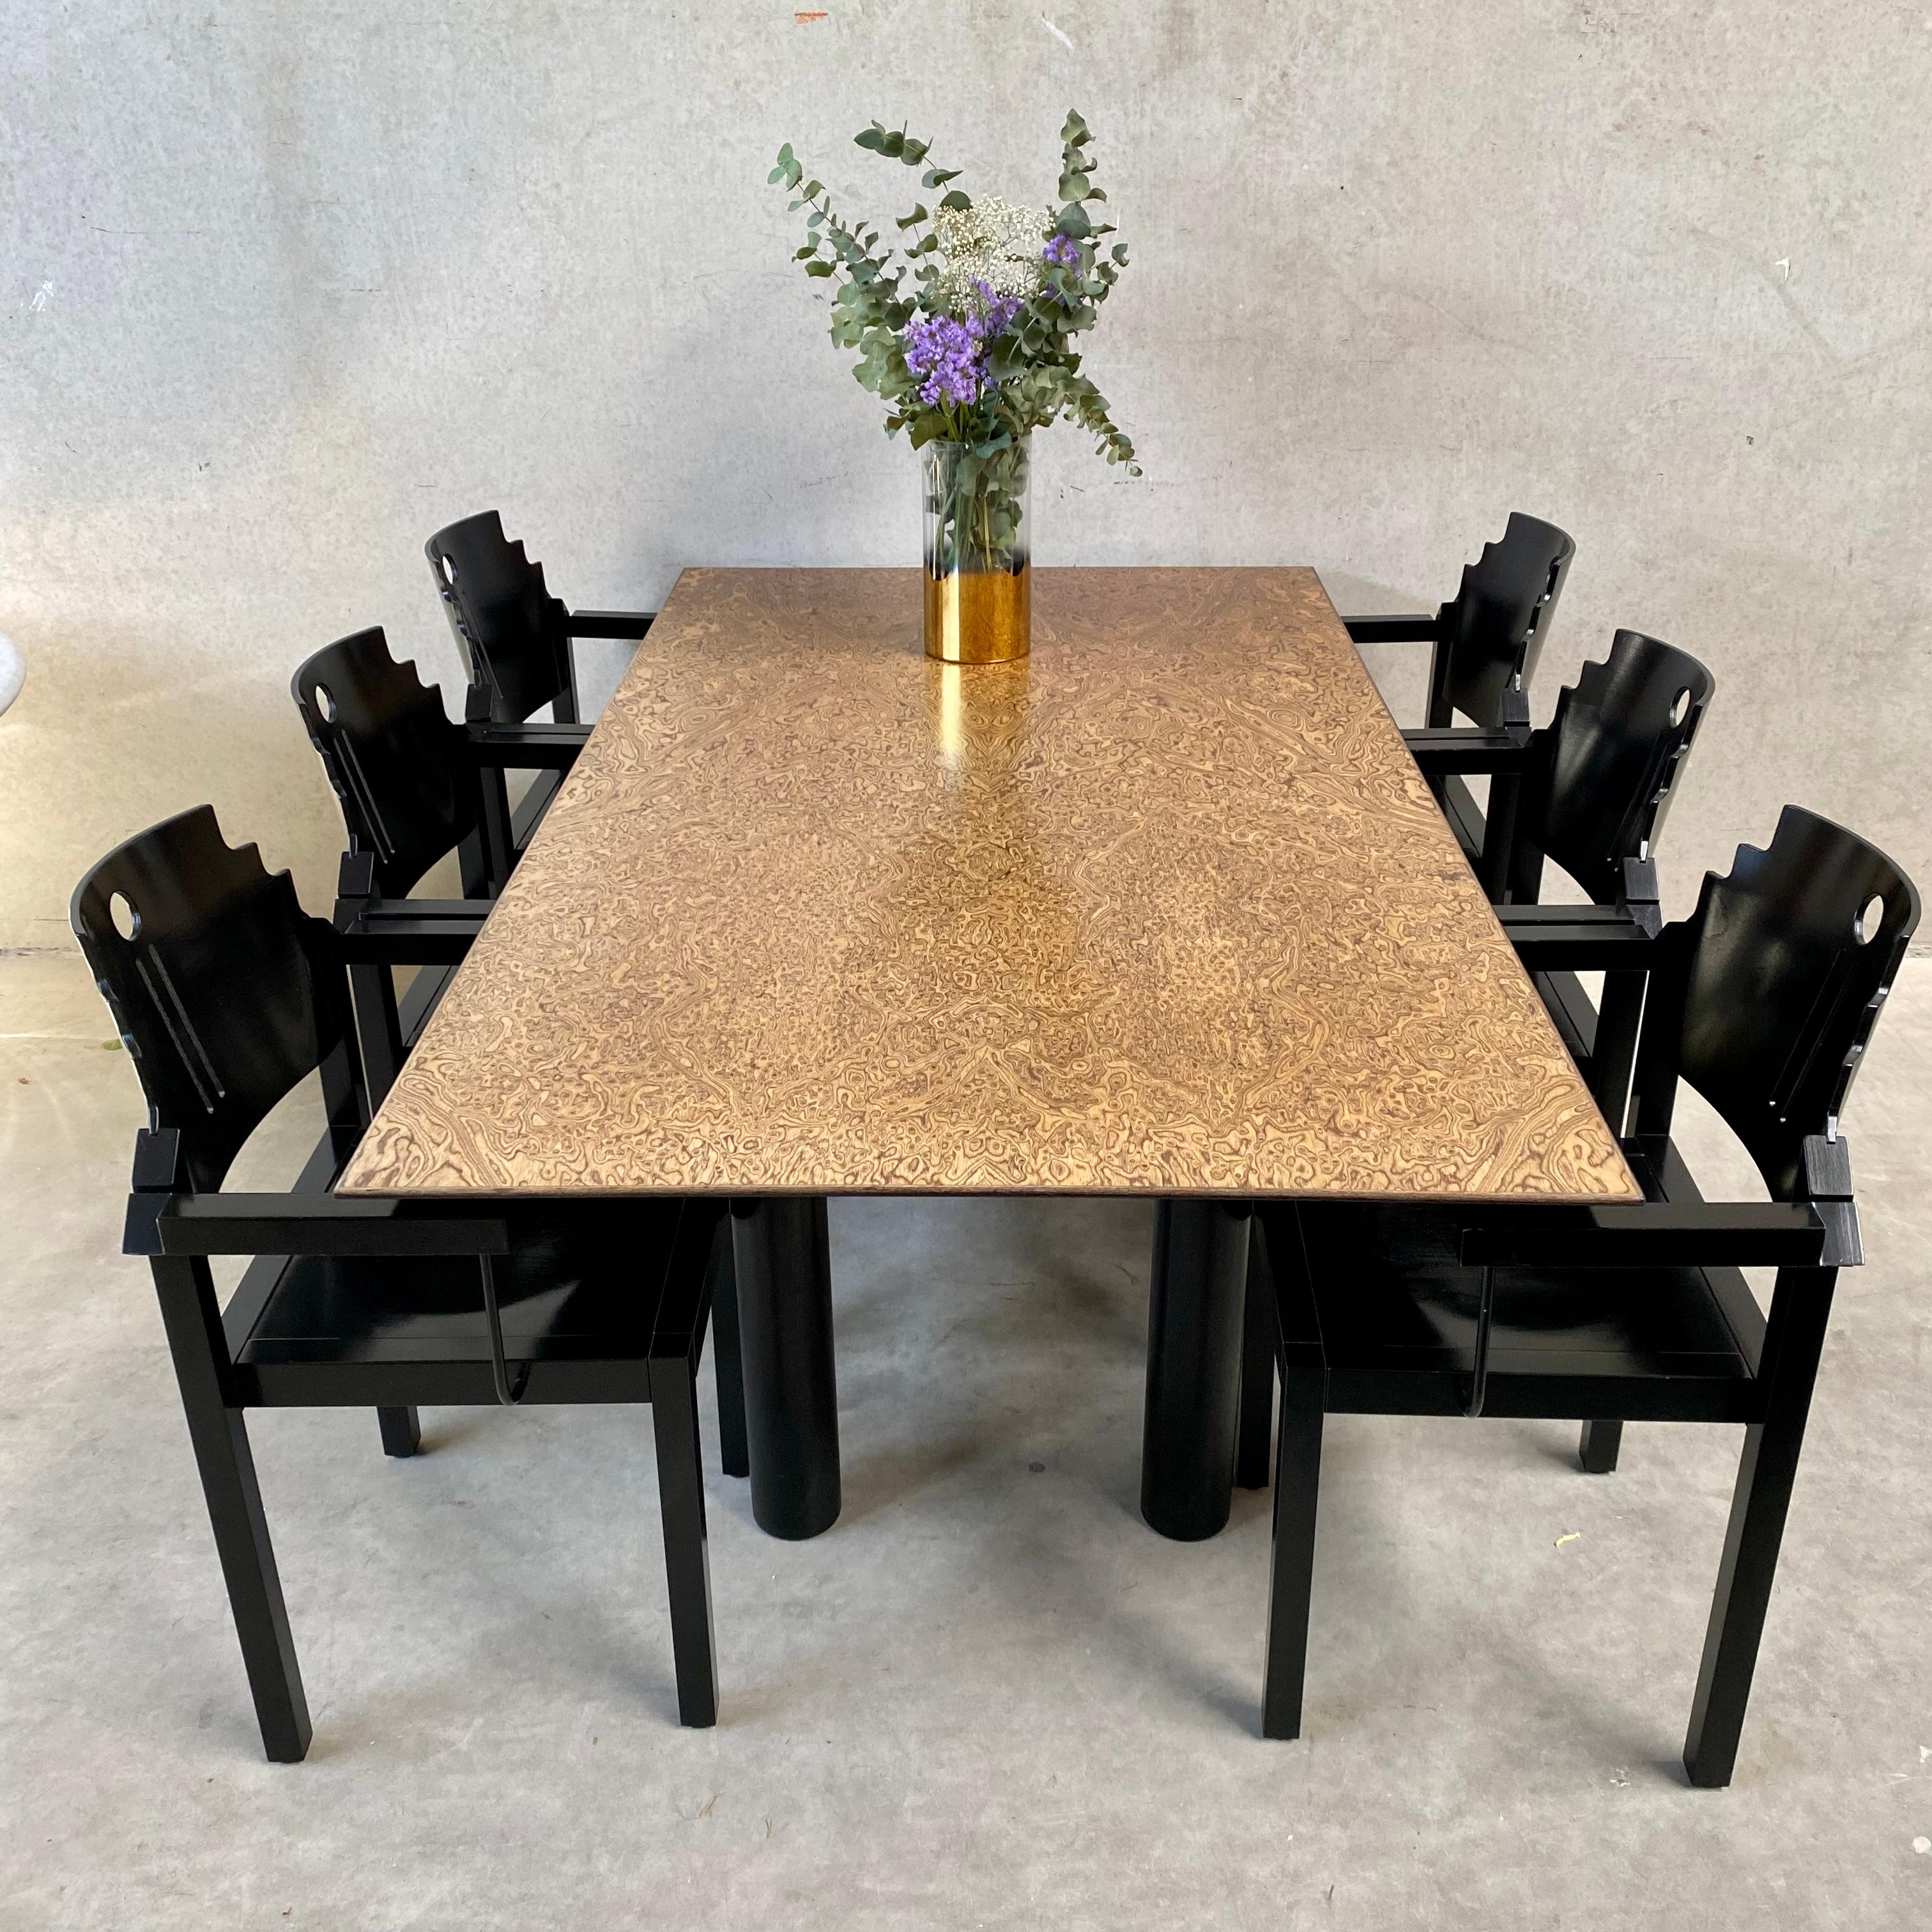 Art Deco Dining room table by Hans Eichenberger for Röthlisberger, Switzerland 1980s